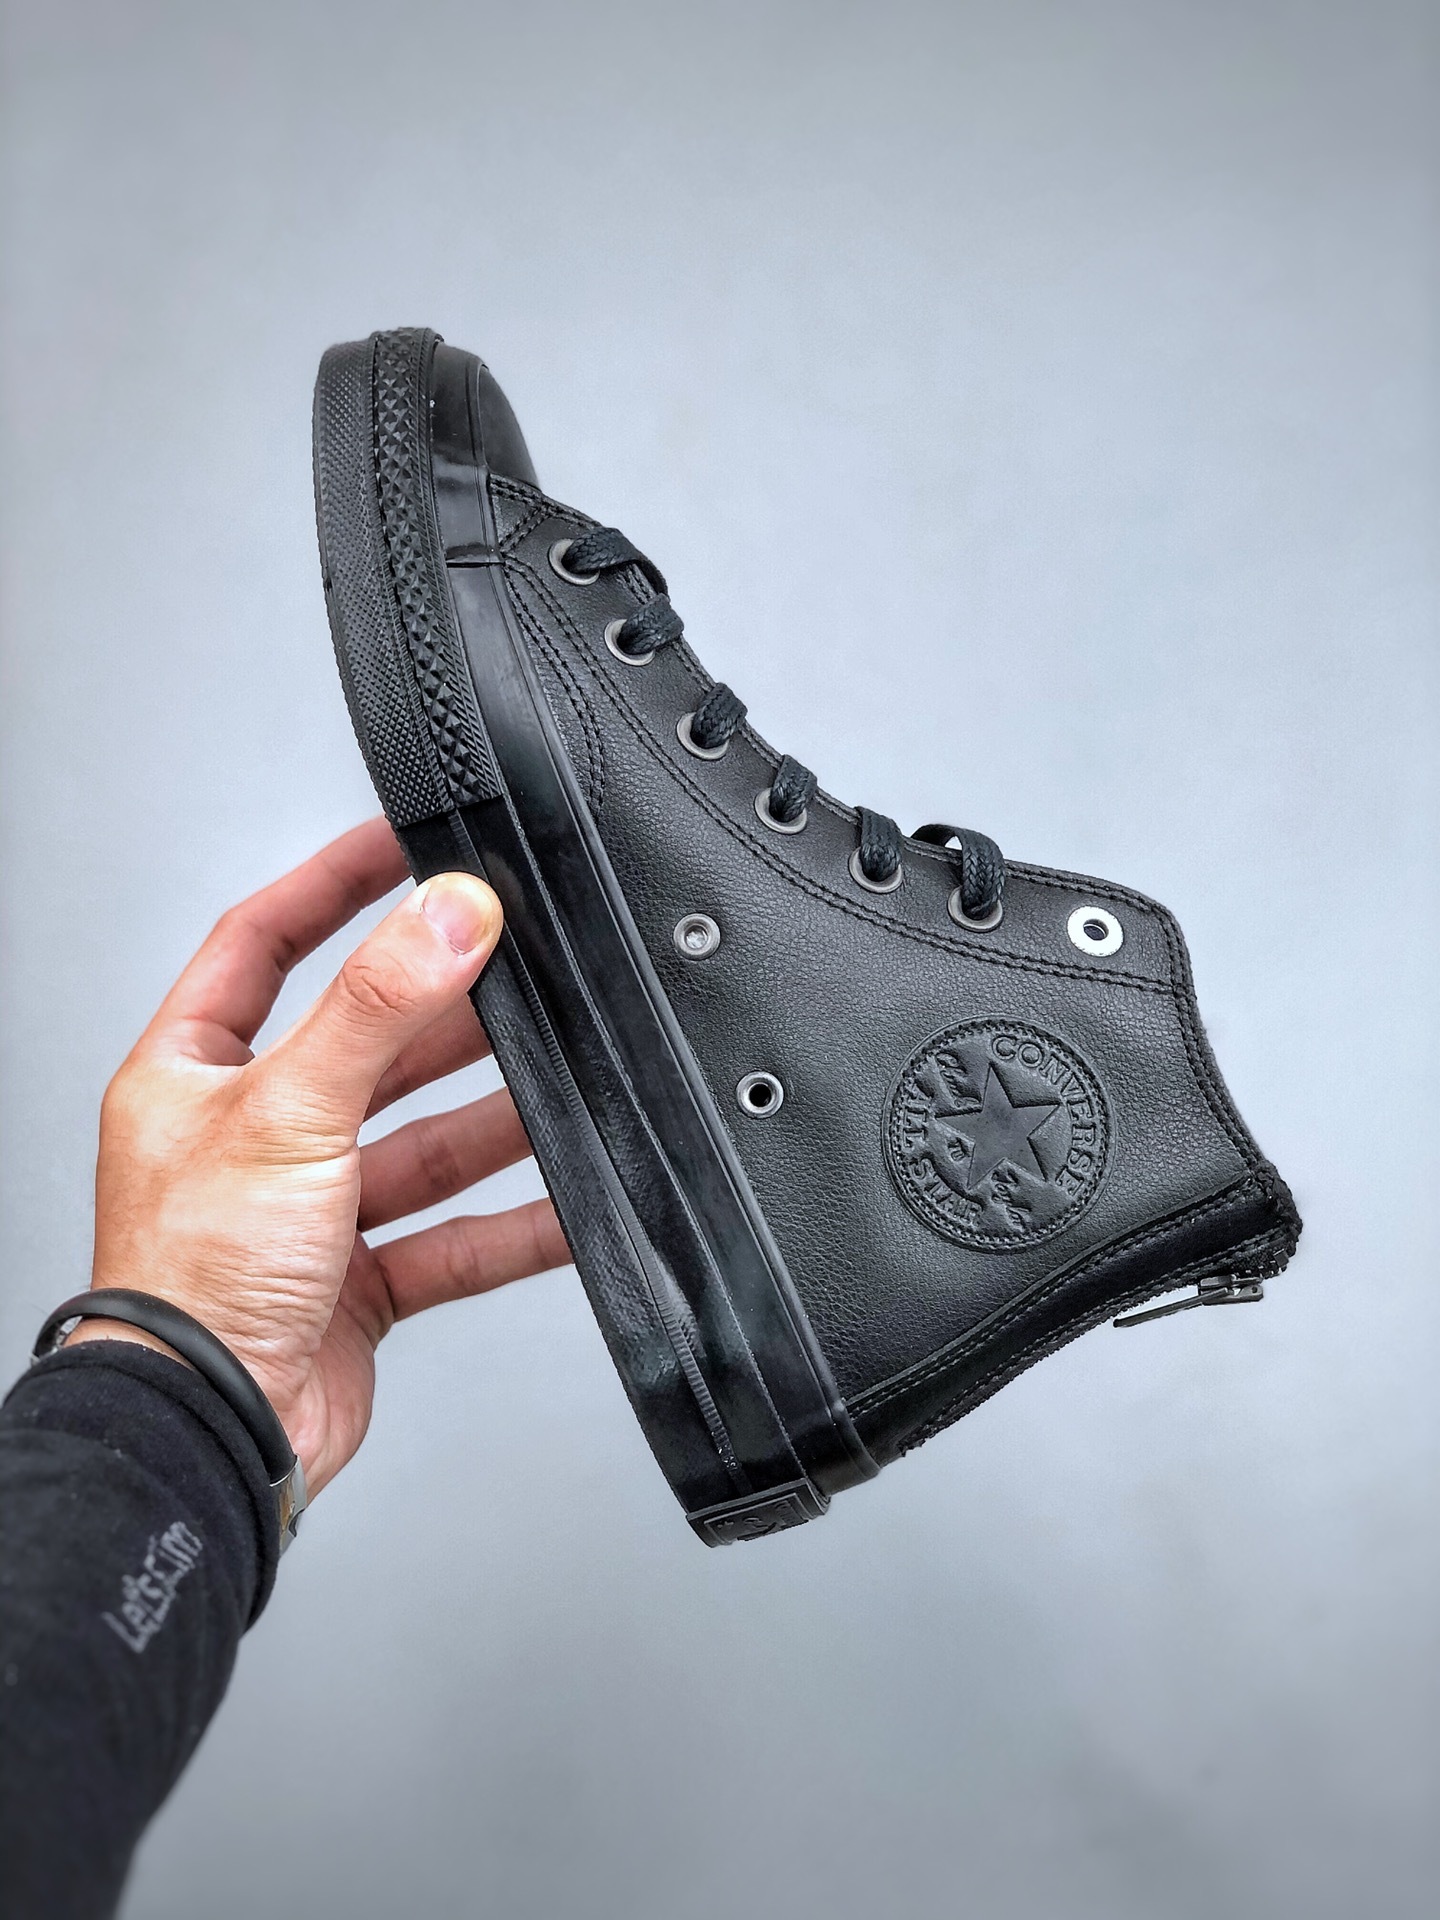 Free shipping and VAT CONVERSE All Star Lift  Leather shoes. Converse thick soles increase women's shoes size: 35-40 Free shipping and VAT CONVERSE All Star Lift  Leather shoes. Converse thick soles increase women's shoes size: 35-40 30,Converse  Leather,Converse  Leather shoes